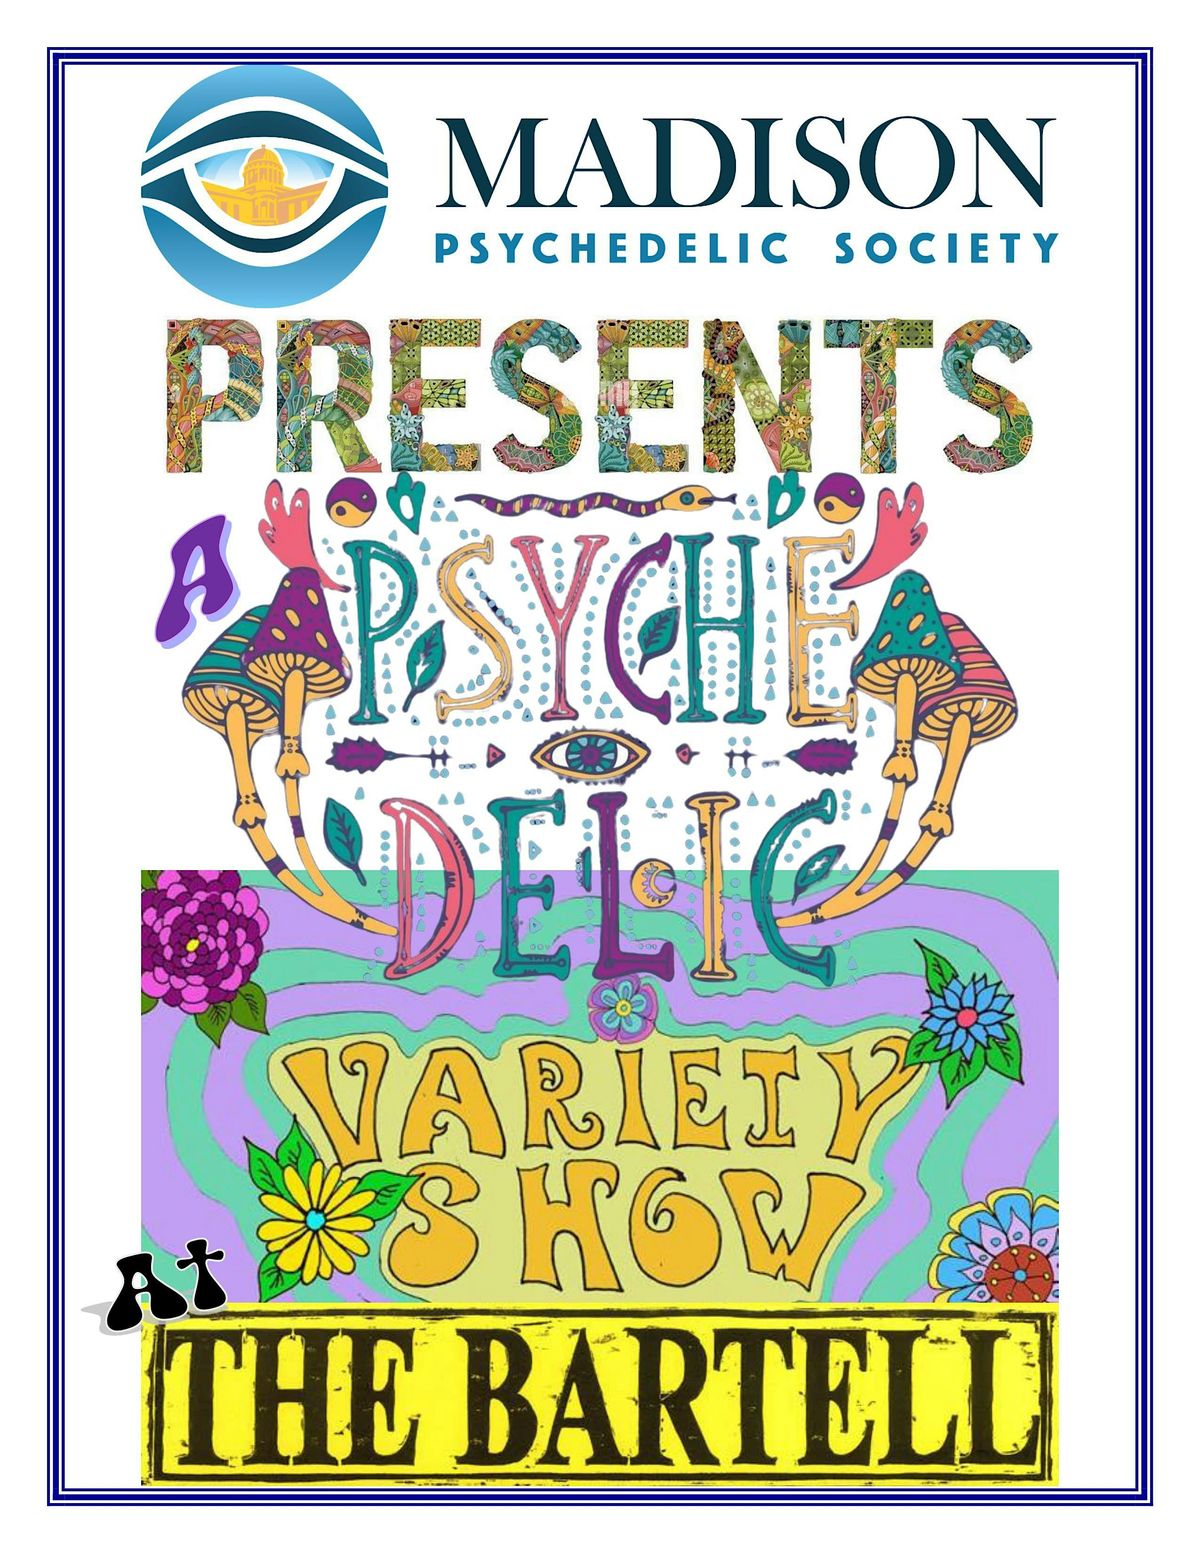 Psychedelic Variety Show